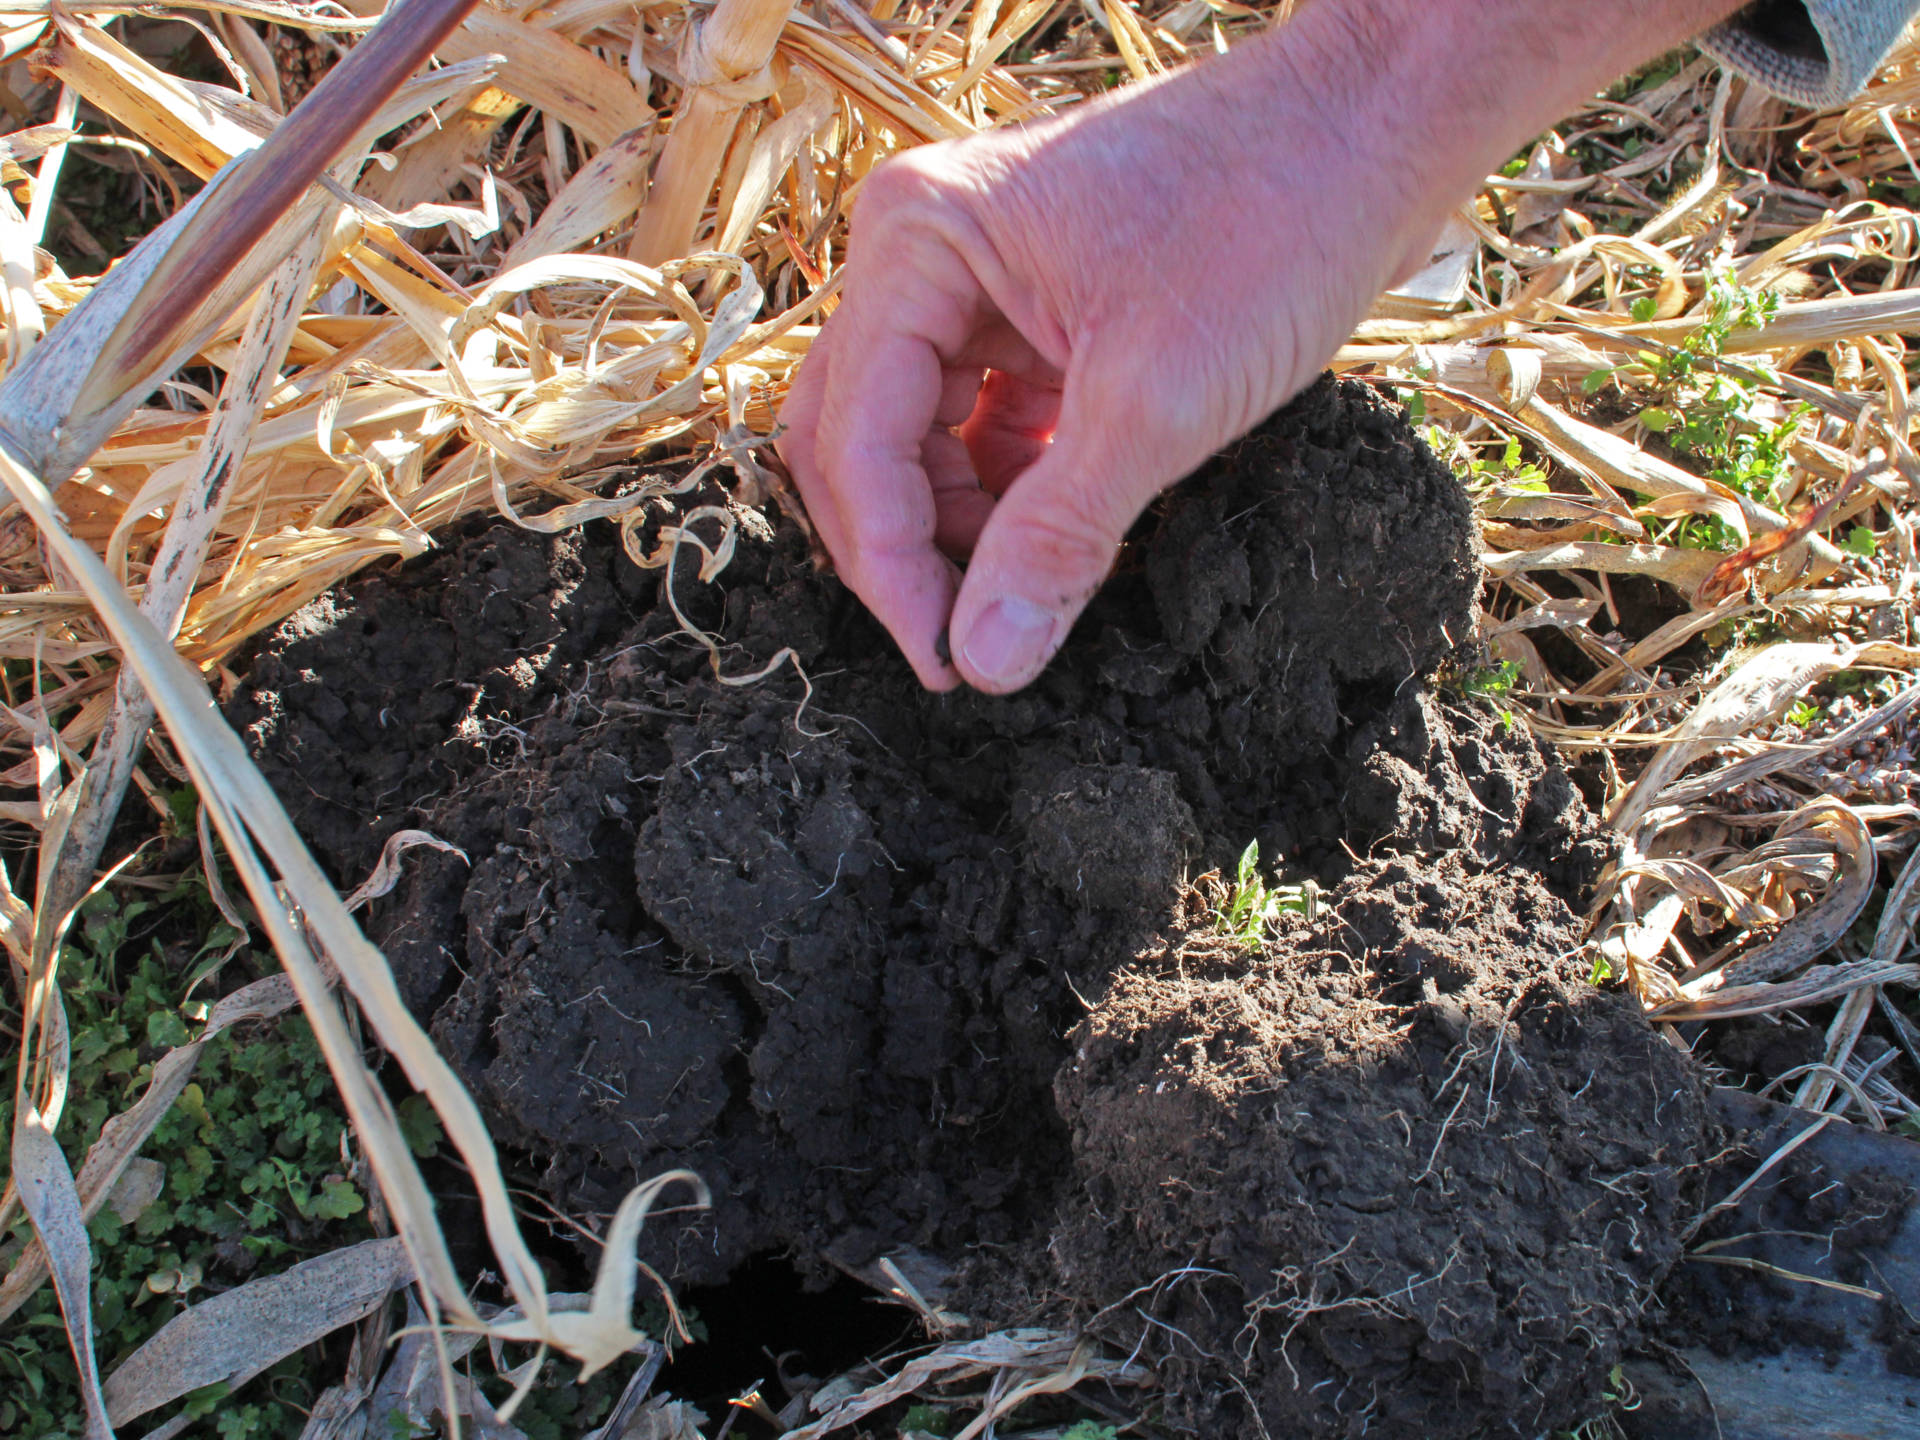 The carbon, or "organic matter" content of this soil on Del Ficke's farm has more than doubled since he changed his farming practices.